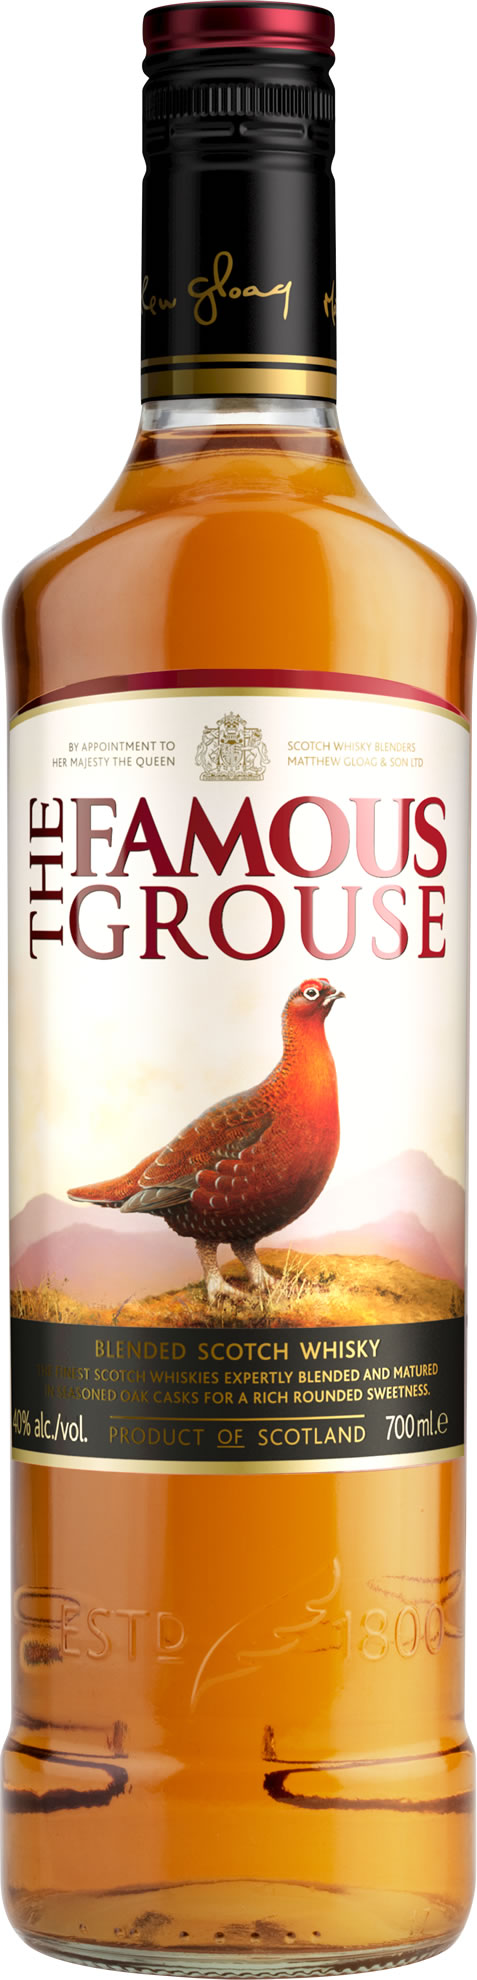 Famous Grouse classic